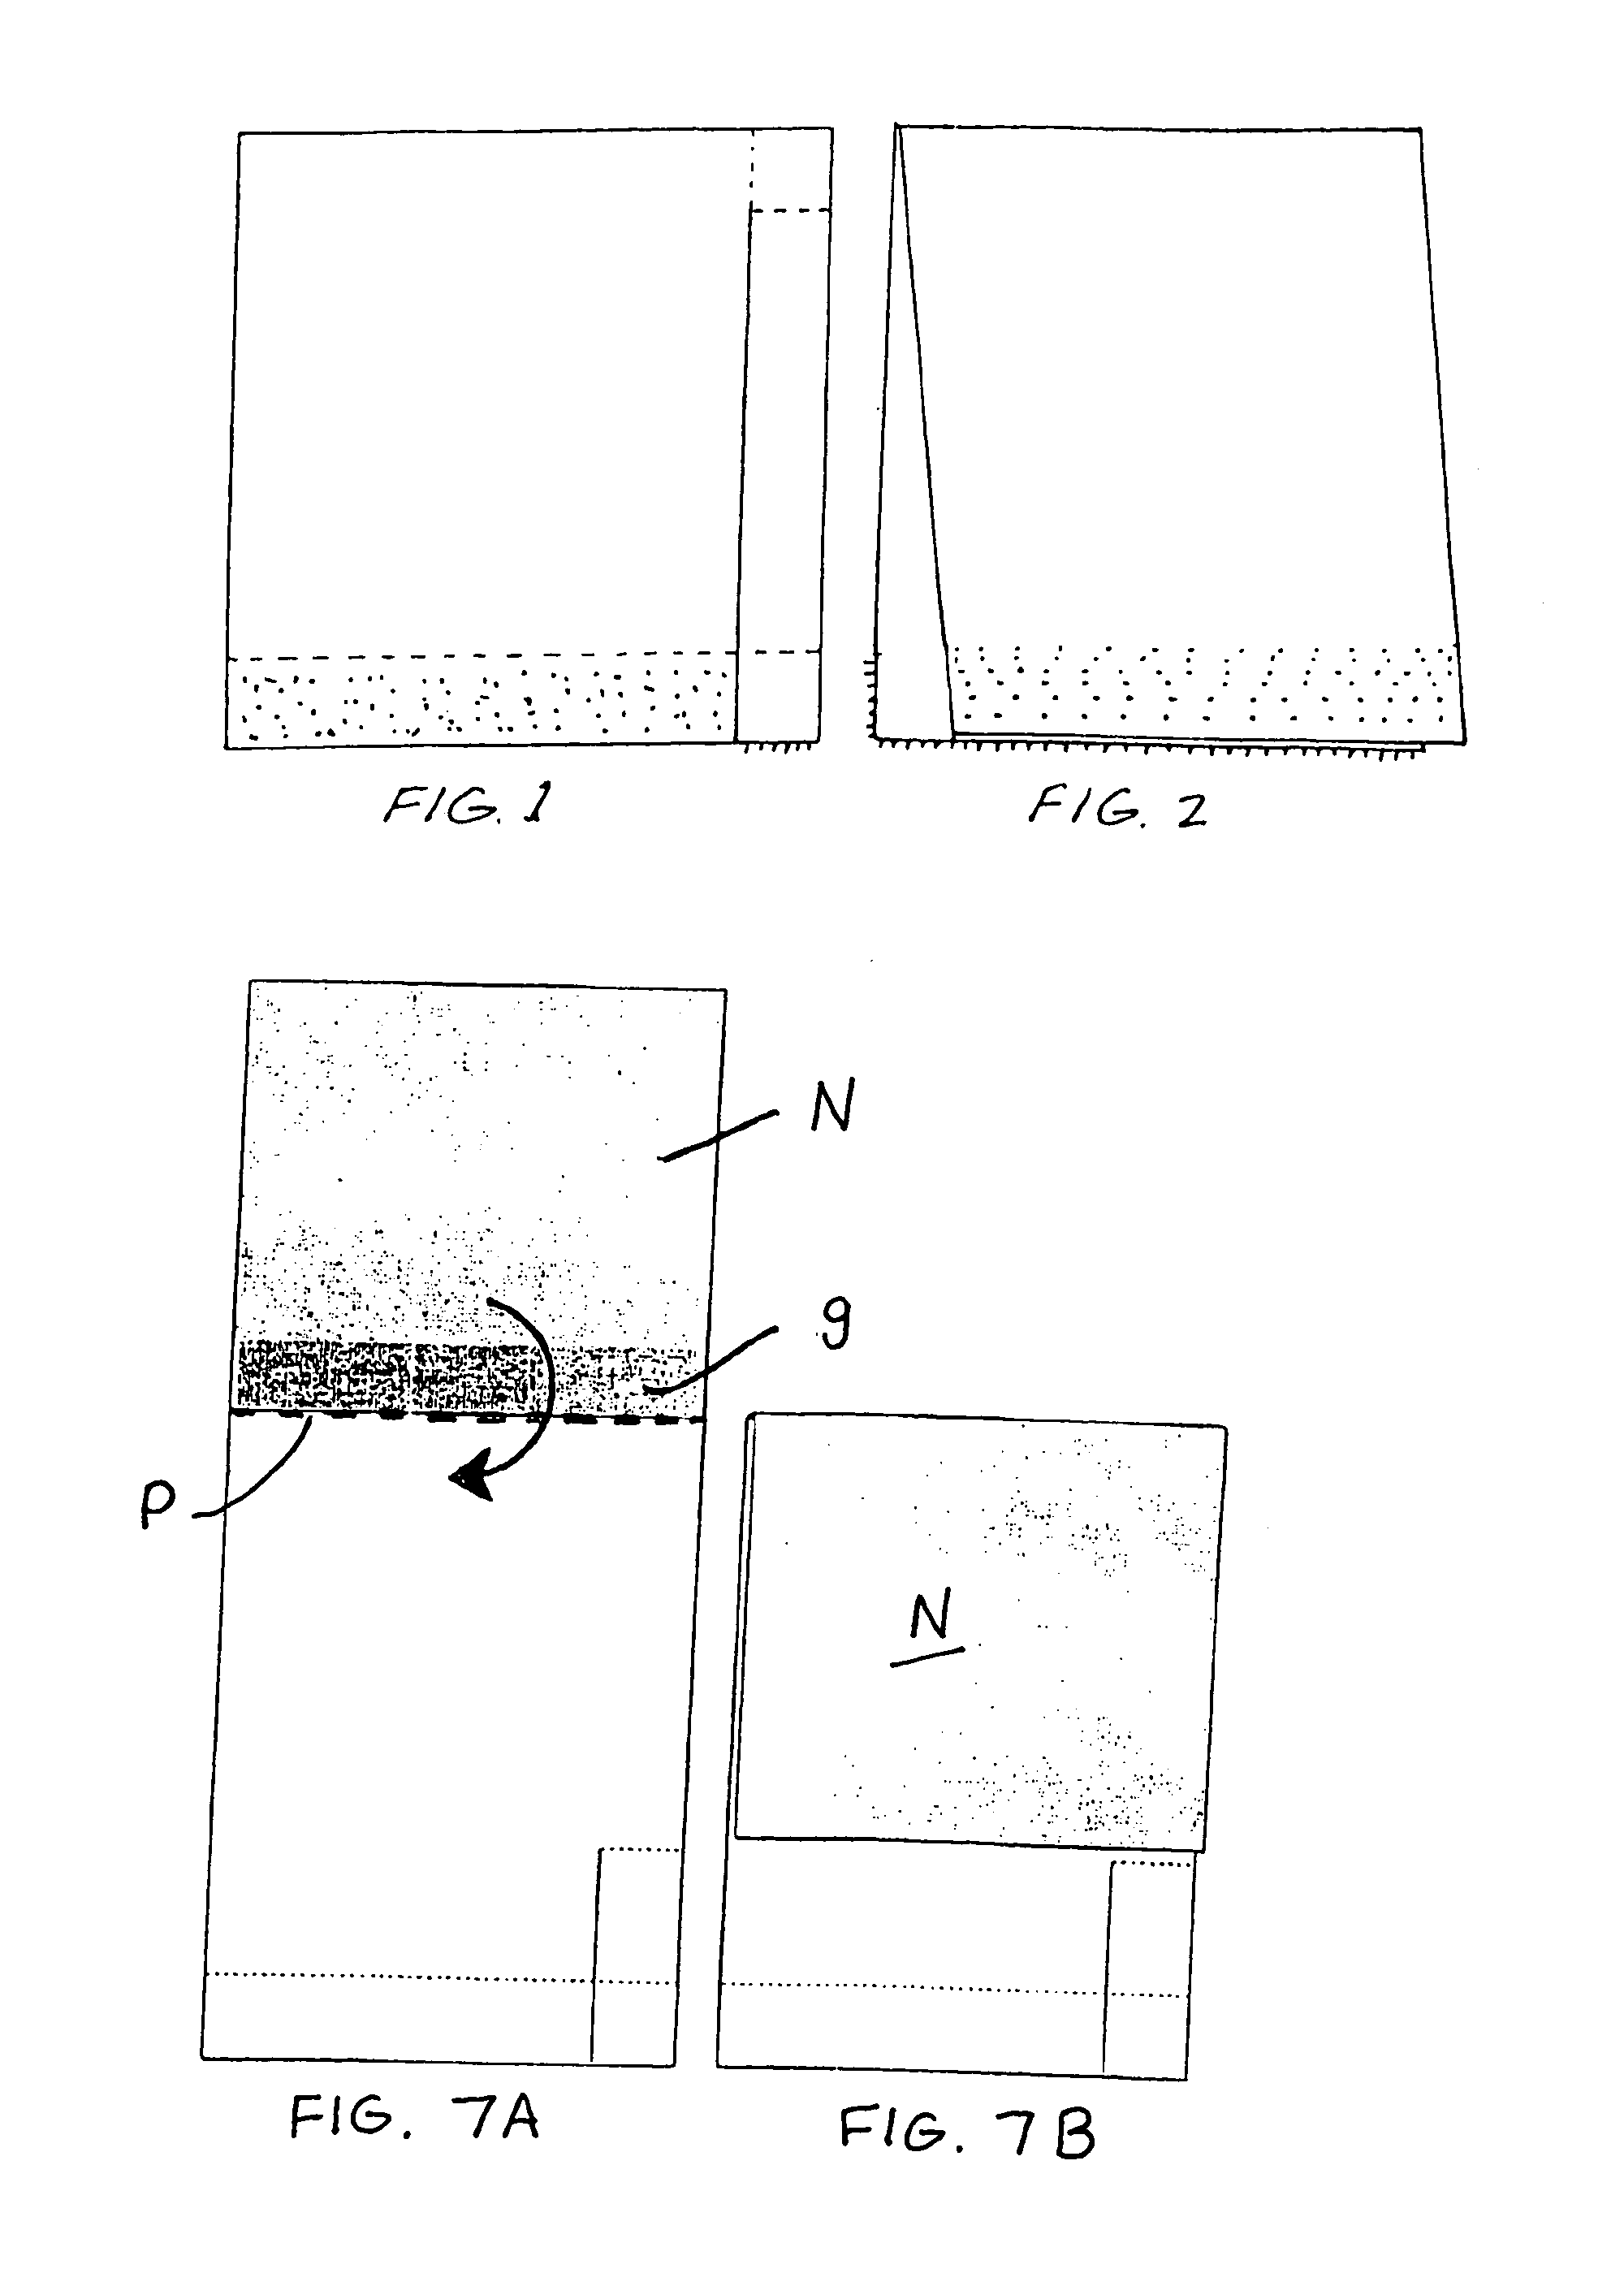 Method of making magazines incorporating pop-ups and strip for use therewith